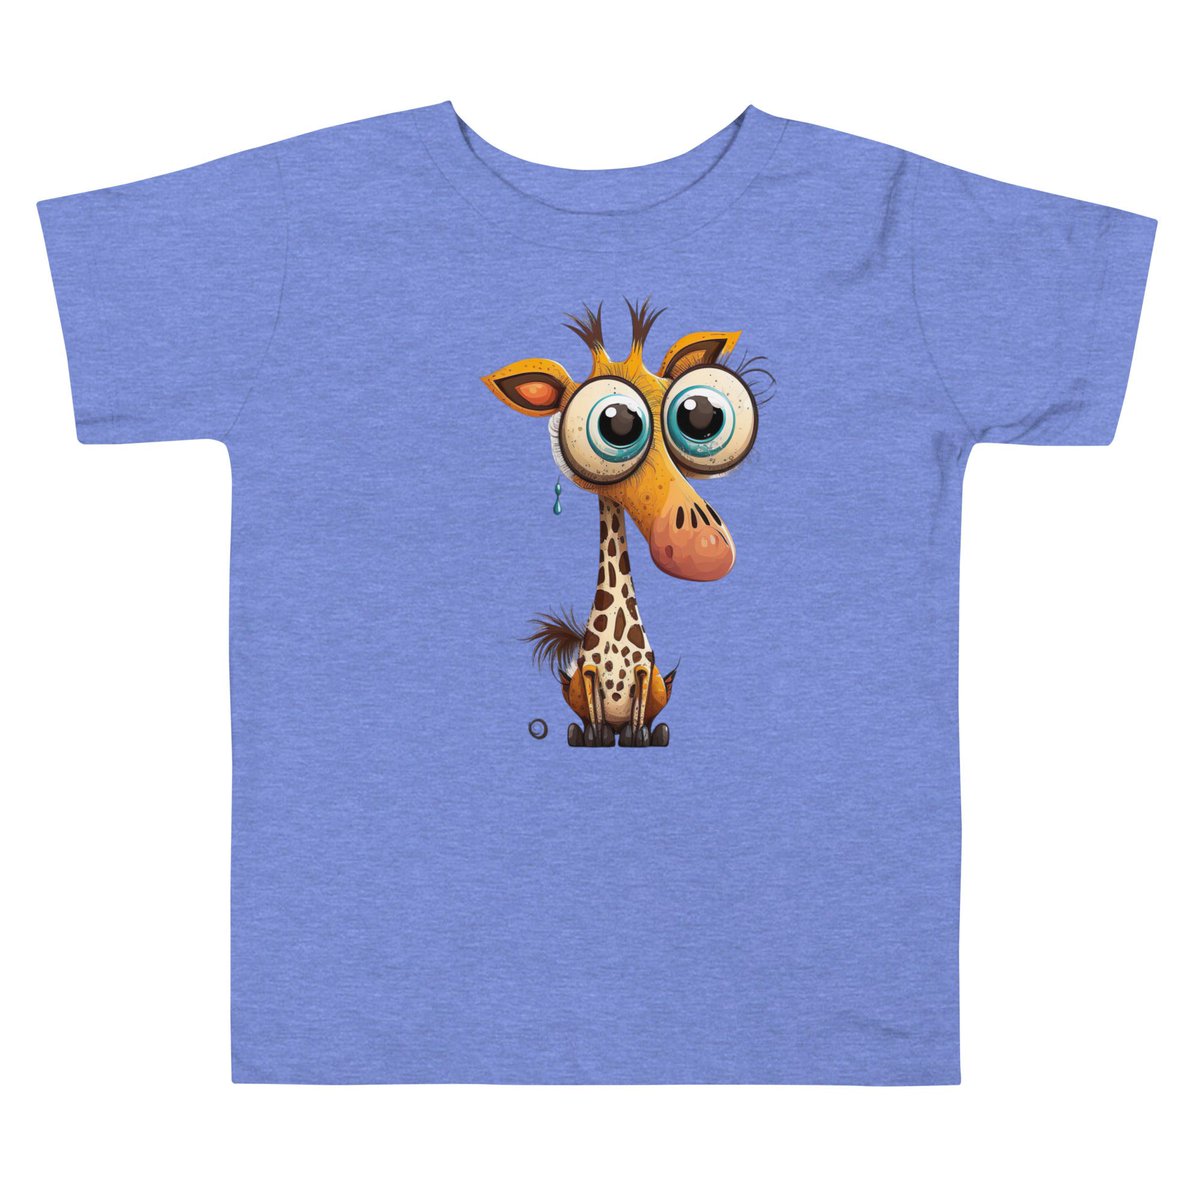 America’s Swag 312 Giraffe Toddler Short Sleeve Tee

Available for purchase at americasswag.com/products/ameri…

buyonlinestore #buyonline💳 #buynowuselater #buynowjapan #buyonlineart #buyonlineph #buyonlineclothes #buynowdontcrylater #buynoworcrylater #buyonlineng #buynowonline #buyer